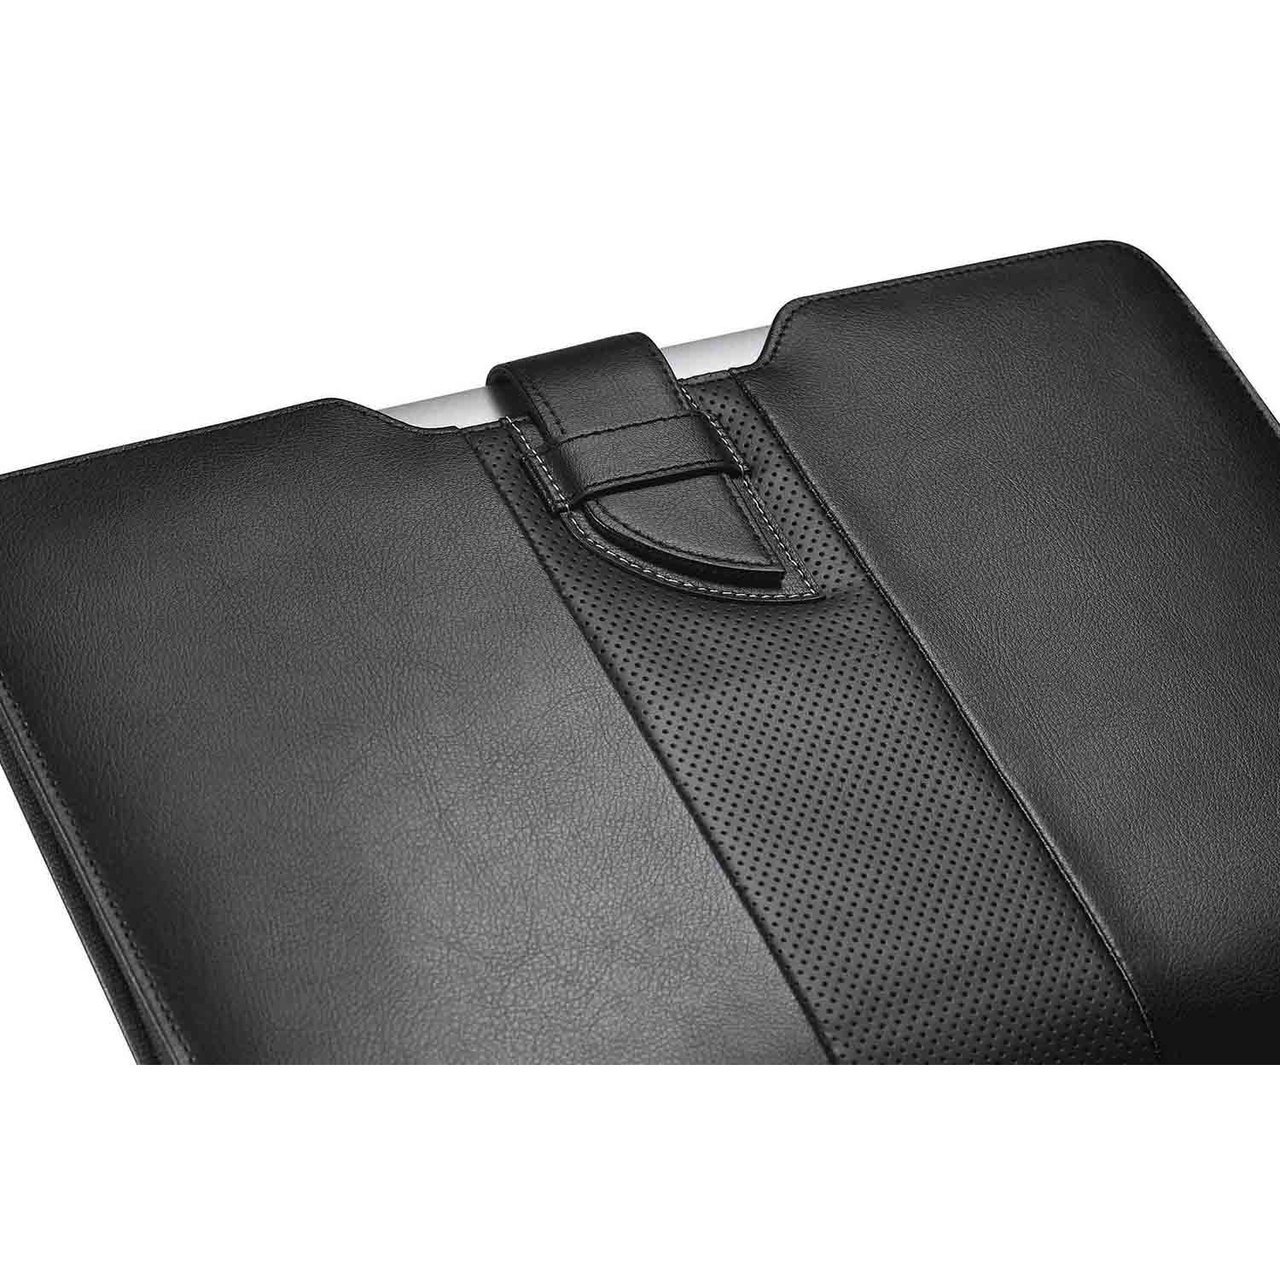 Targus Ultralife Black Executive Leather Sleeve For 13.3 Laptop Bags ...